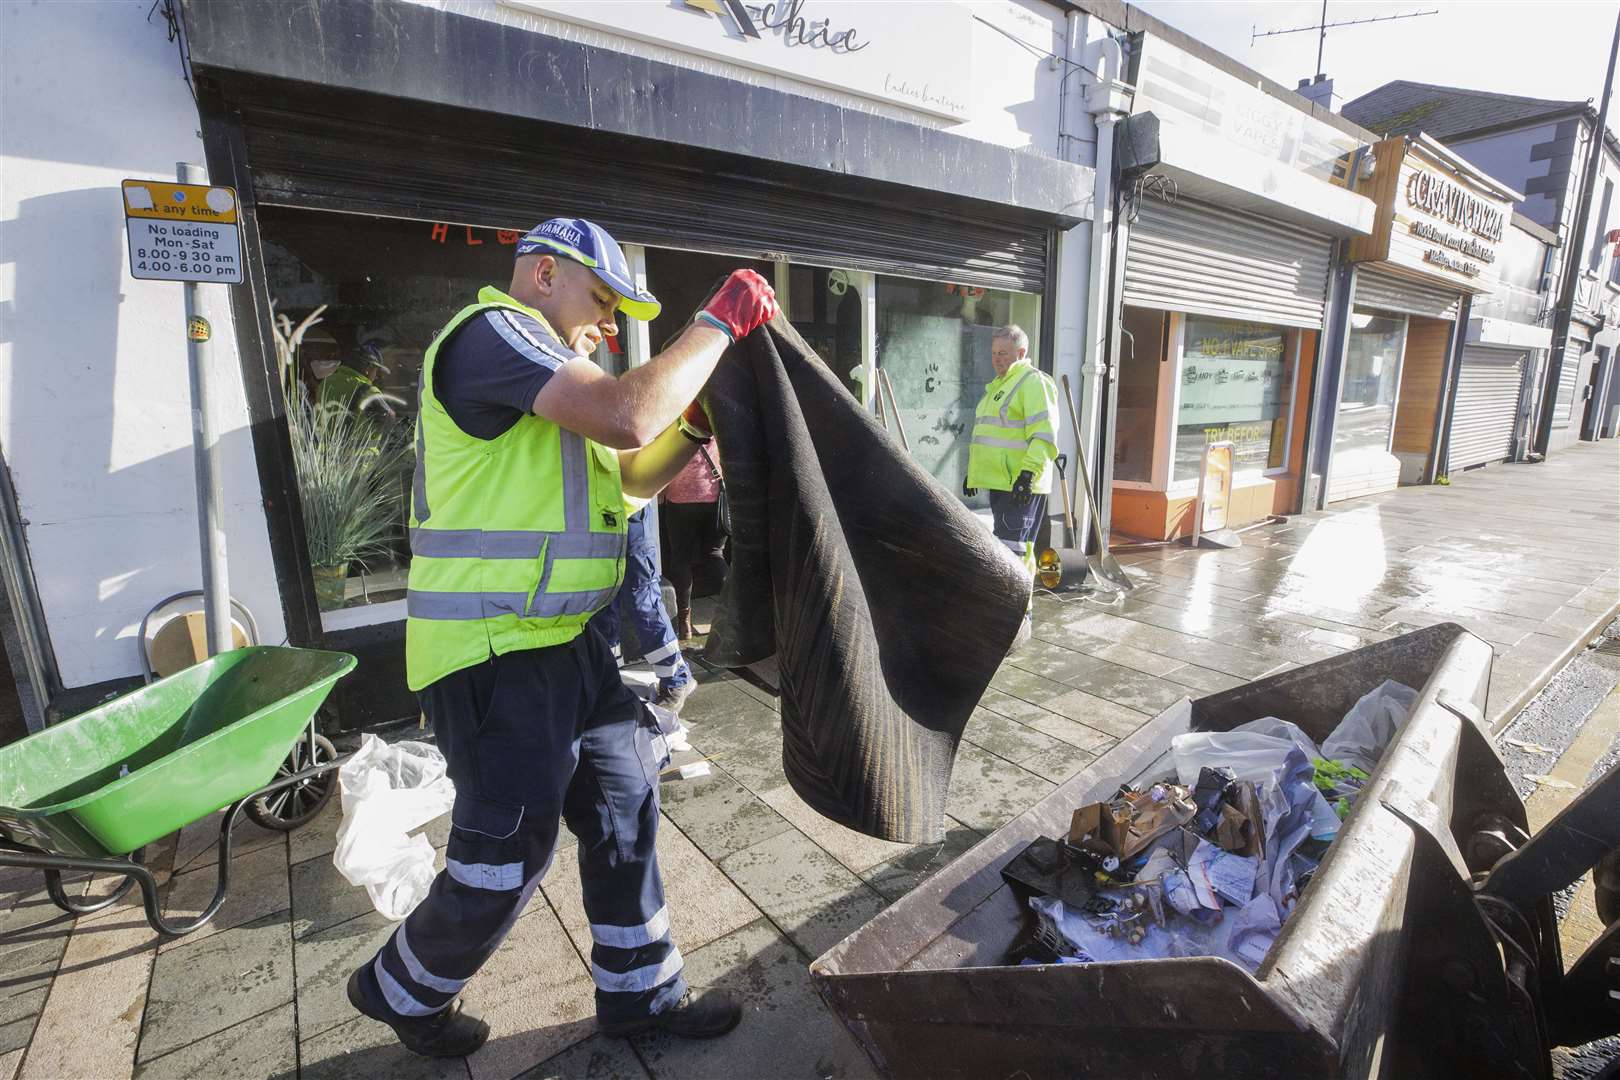 Council workers from Newry, Mourne and Down District Council help clean up flood-stricken Downpatrick, Co Down, where several town centre shops were completely submerged in water (Liam McBurney/PA)